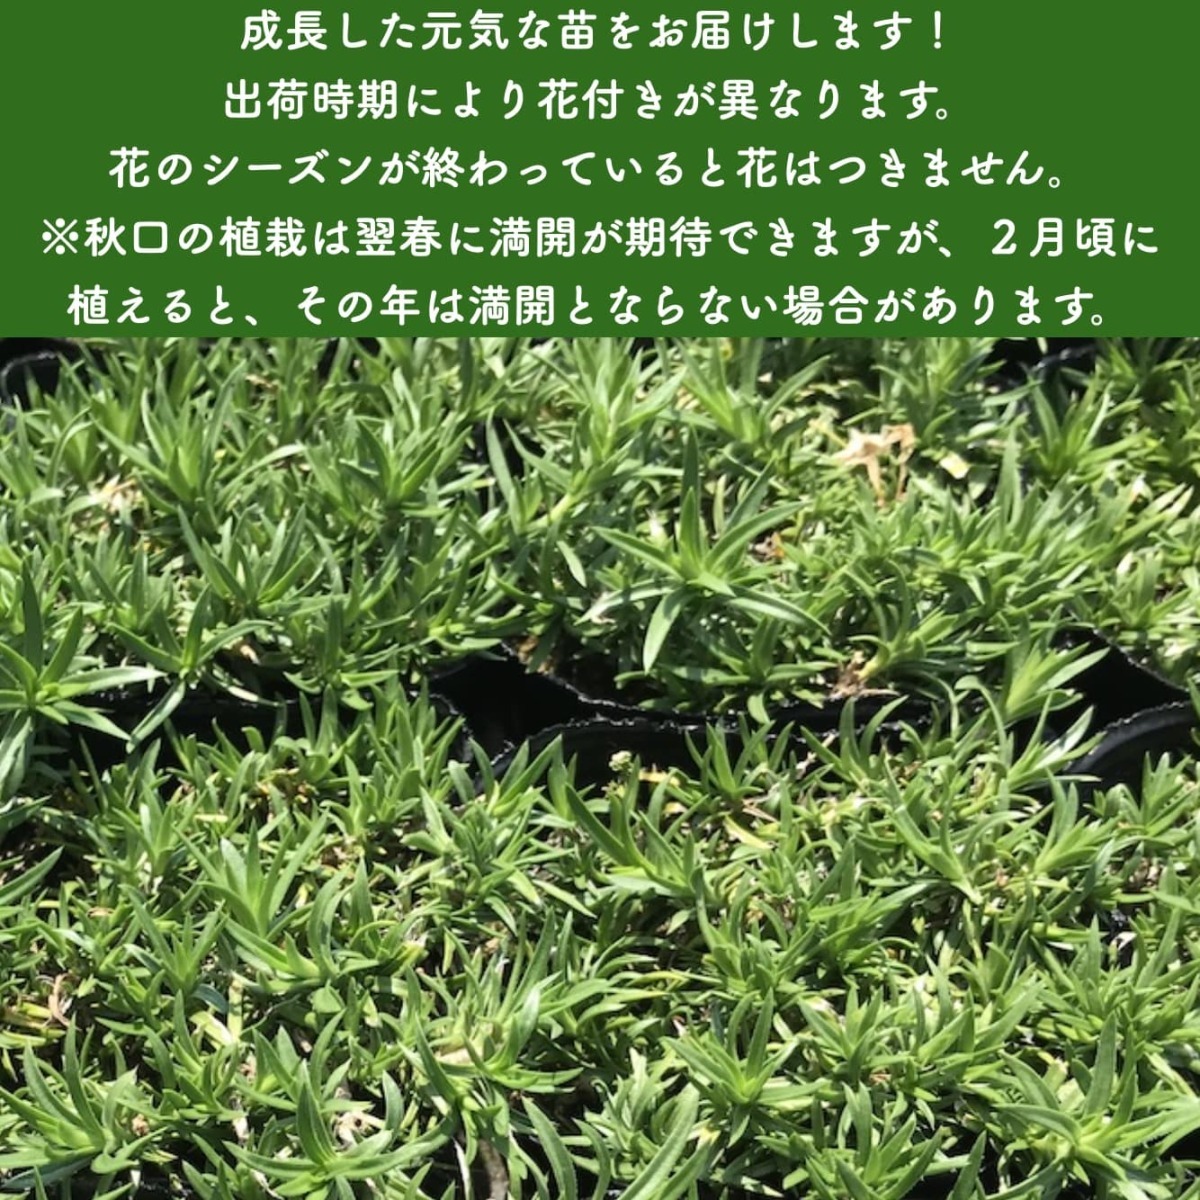  Revue privilege equipped high quality lawn grass Sakura o- gold ton Blue Eye blue color kind 9cm pot seedling 80 stock siba The kla ground cover free shipping 